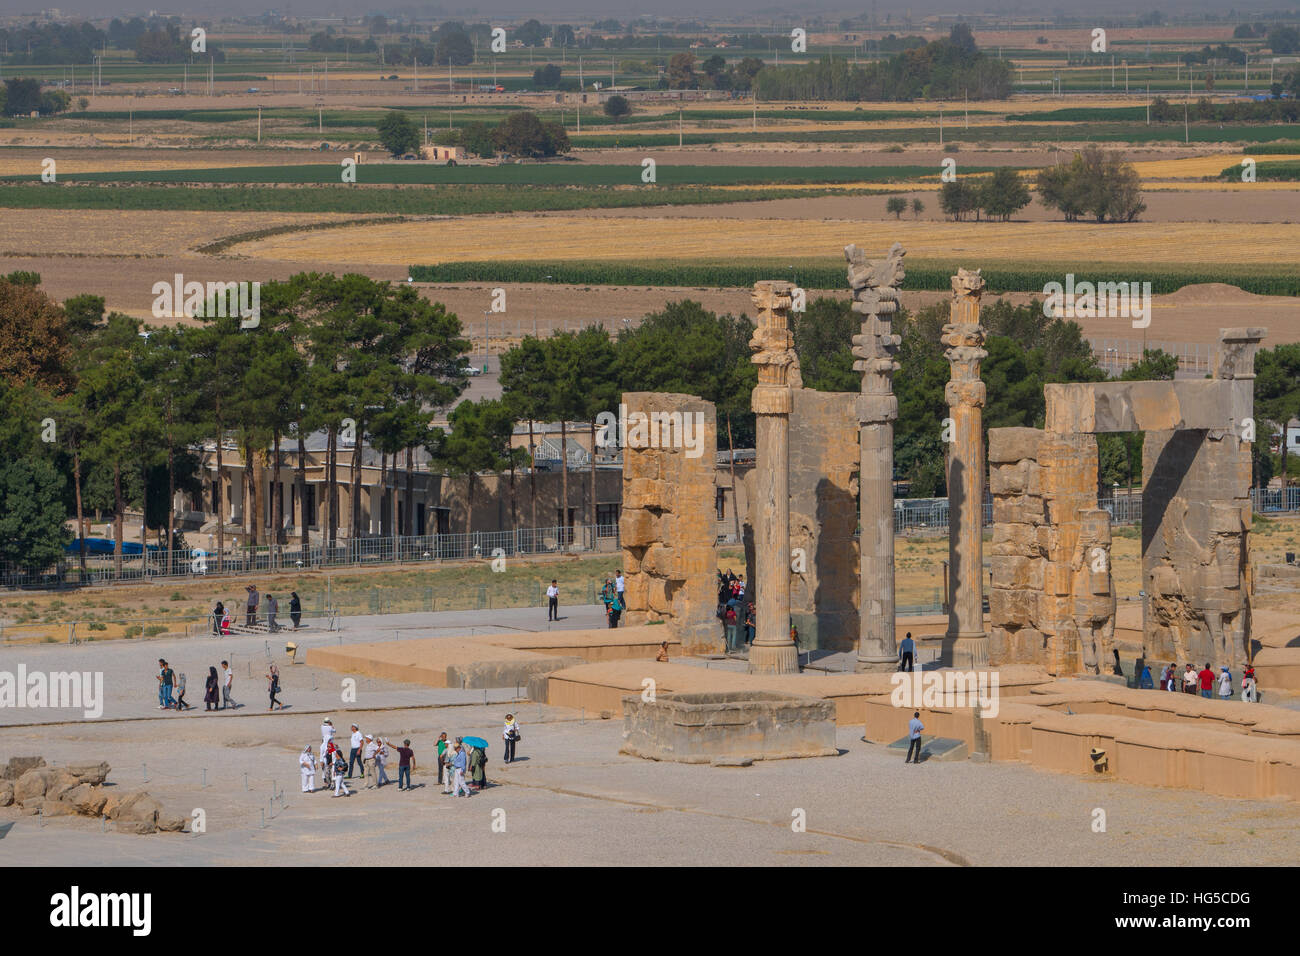 Overview of All Nations Gate and tourist groups setting off on their tours, Persepolis, UNESCO, Iran, Middle East Stock Photo